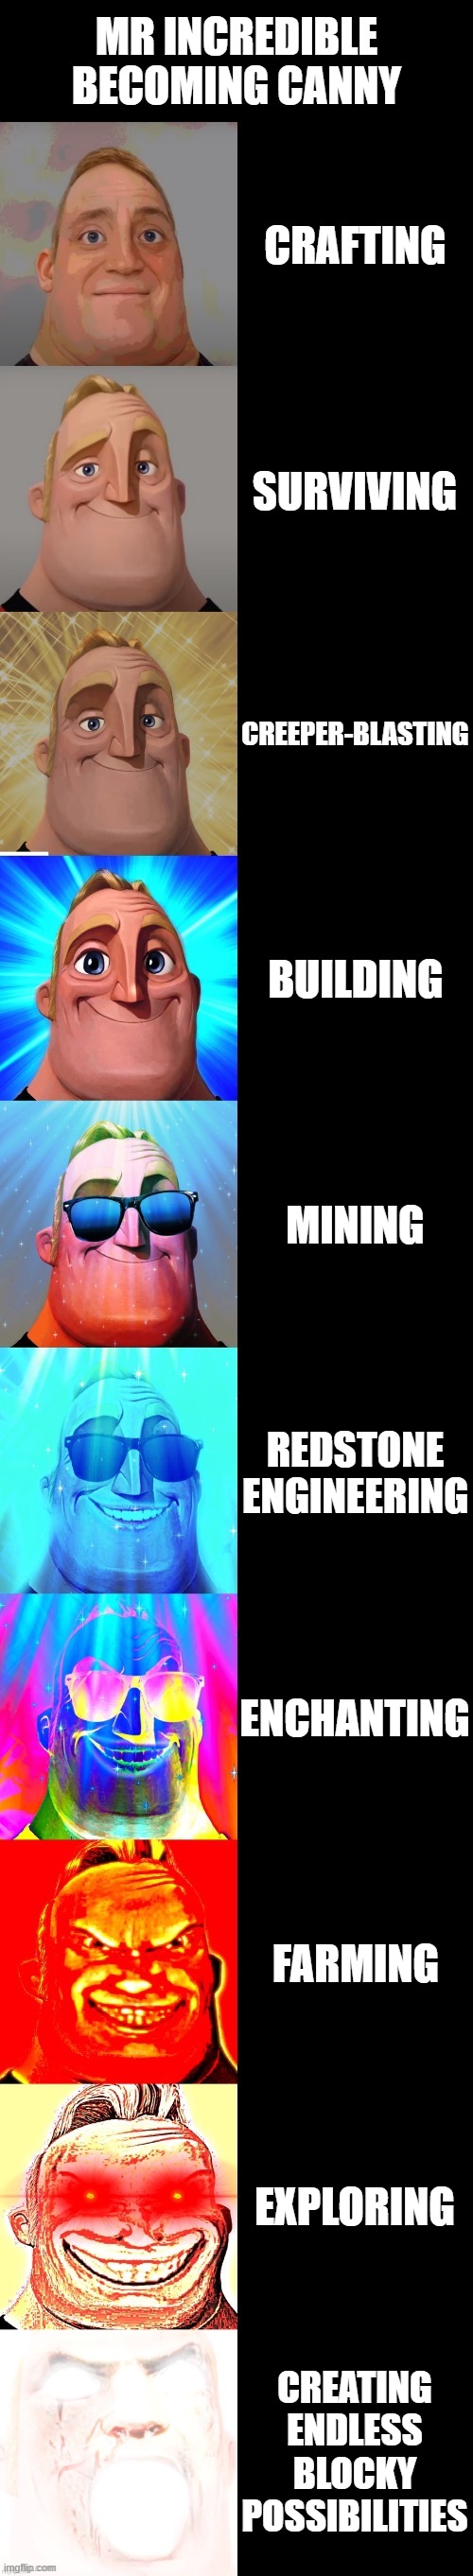 i cant believe ai made this cringe stuff | MR INCREDIBLE BECOMING CANNY; CRAFTING; SURVIVING; CREEPER-BLASTING; BUILDING; MINING; REDSTONE ENGINEERING; ENCHANTING; FARMING; EXPLORING; CREATING ENDLESS BLOCKY POSSIBILITIES | image tagged in mr incredible becoming canny | made w/ Imgflip meme maker